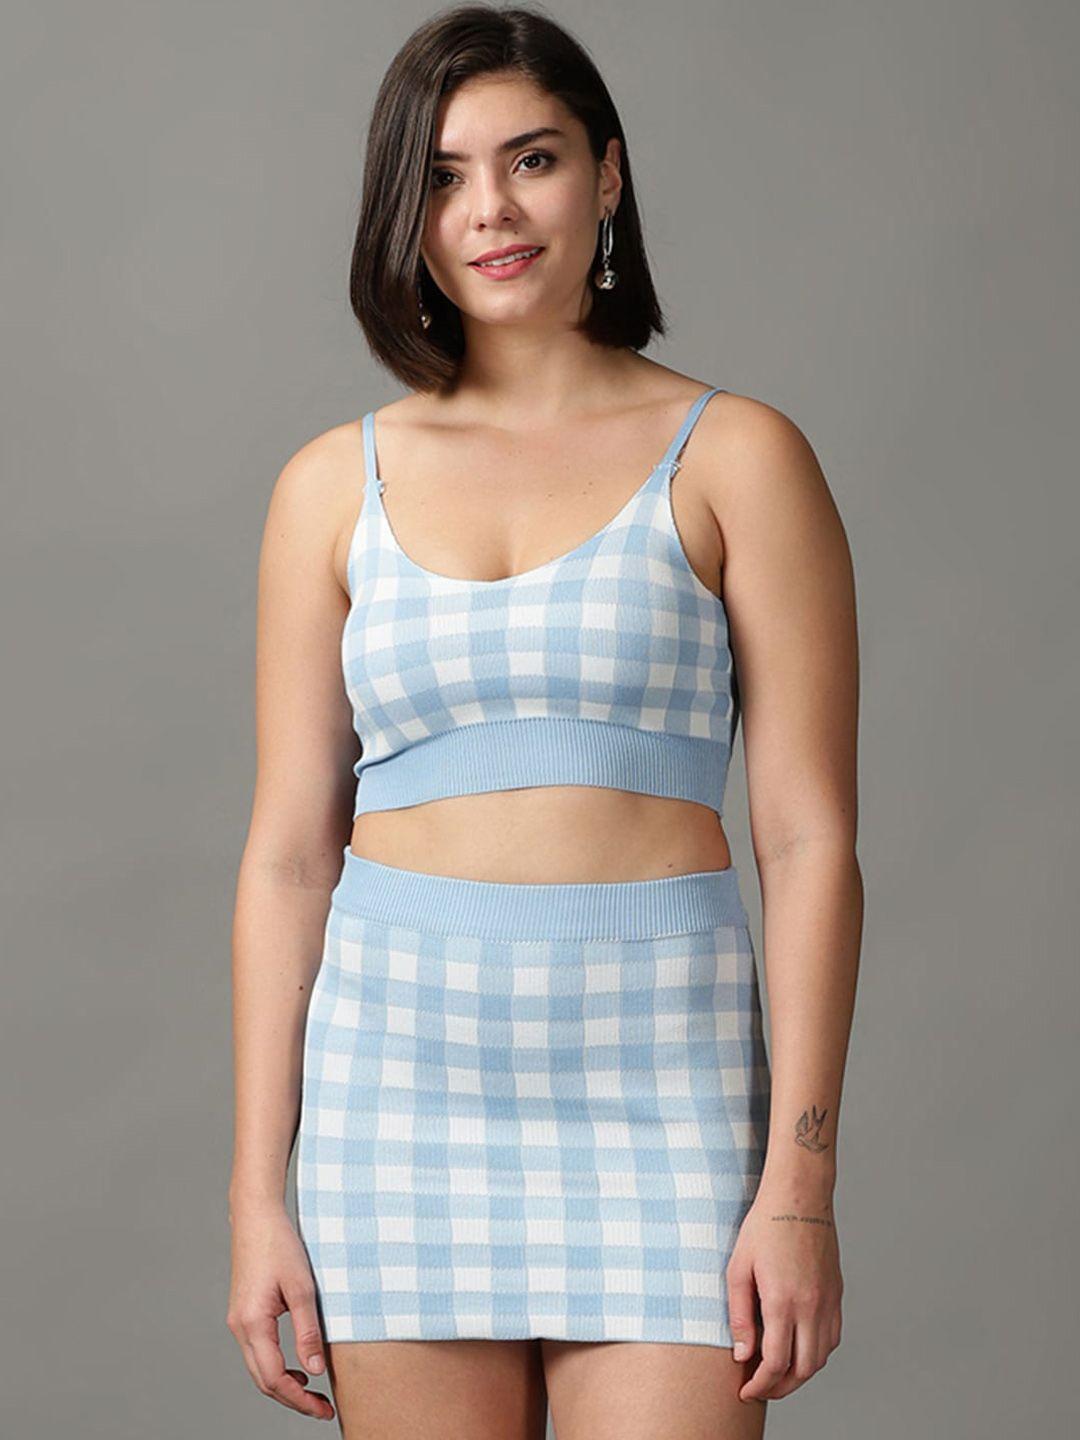 showoff women checked top & skirt co-ords set